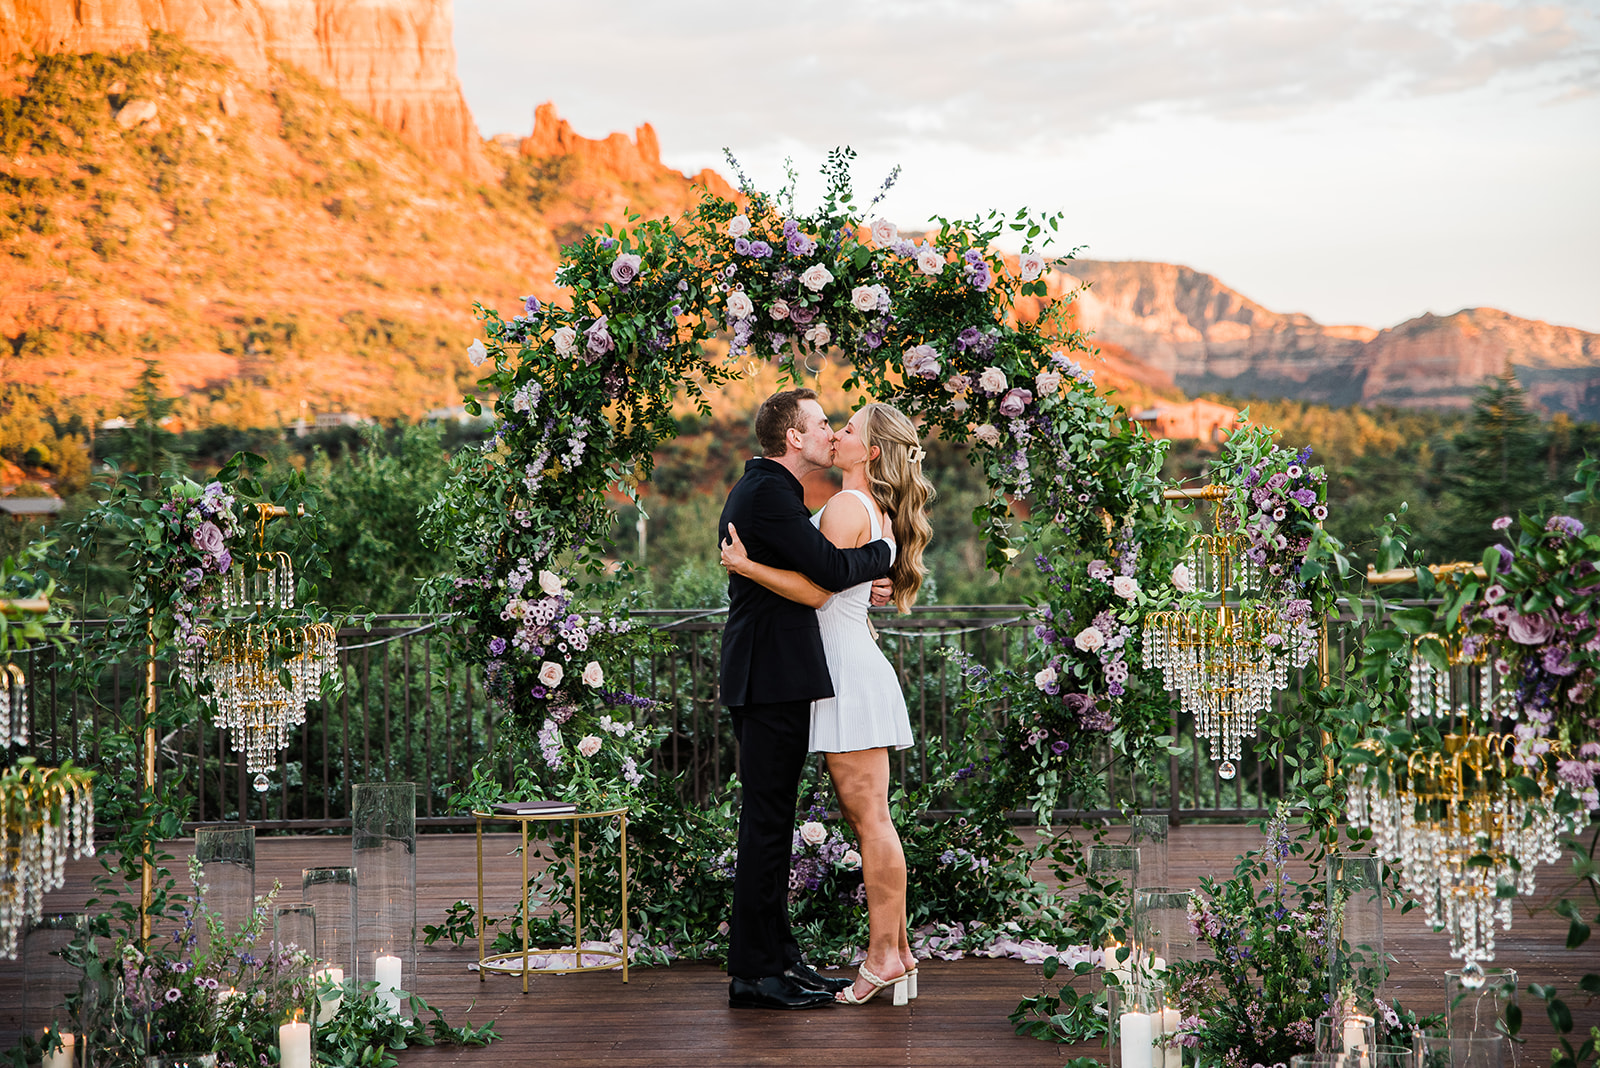 Newly engaged couple kisses in a black suit and white dress at a mountain overlook decorated with chandeliers and purple florals